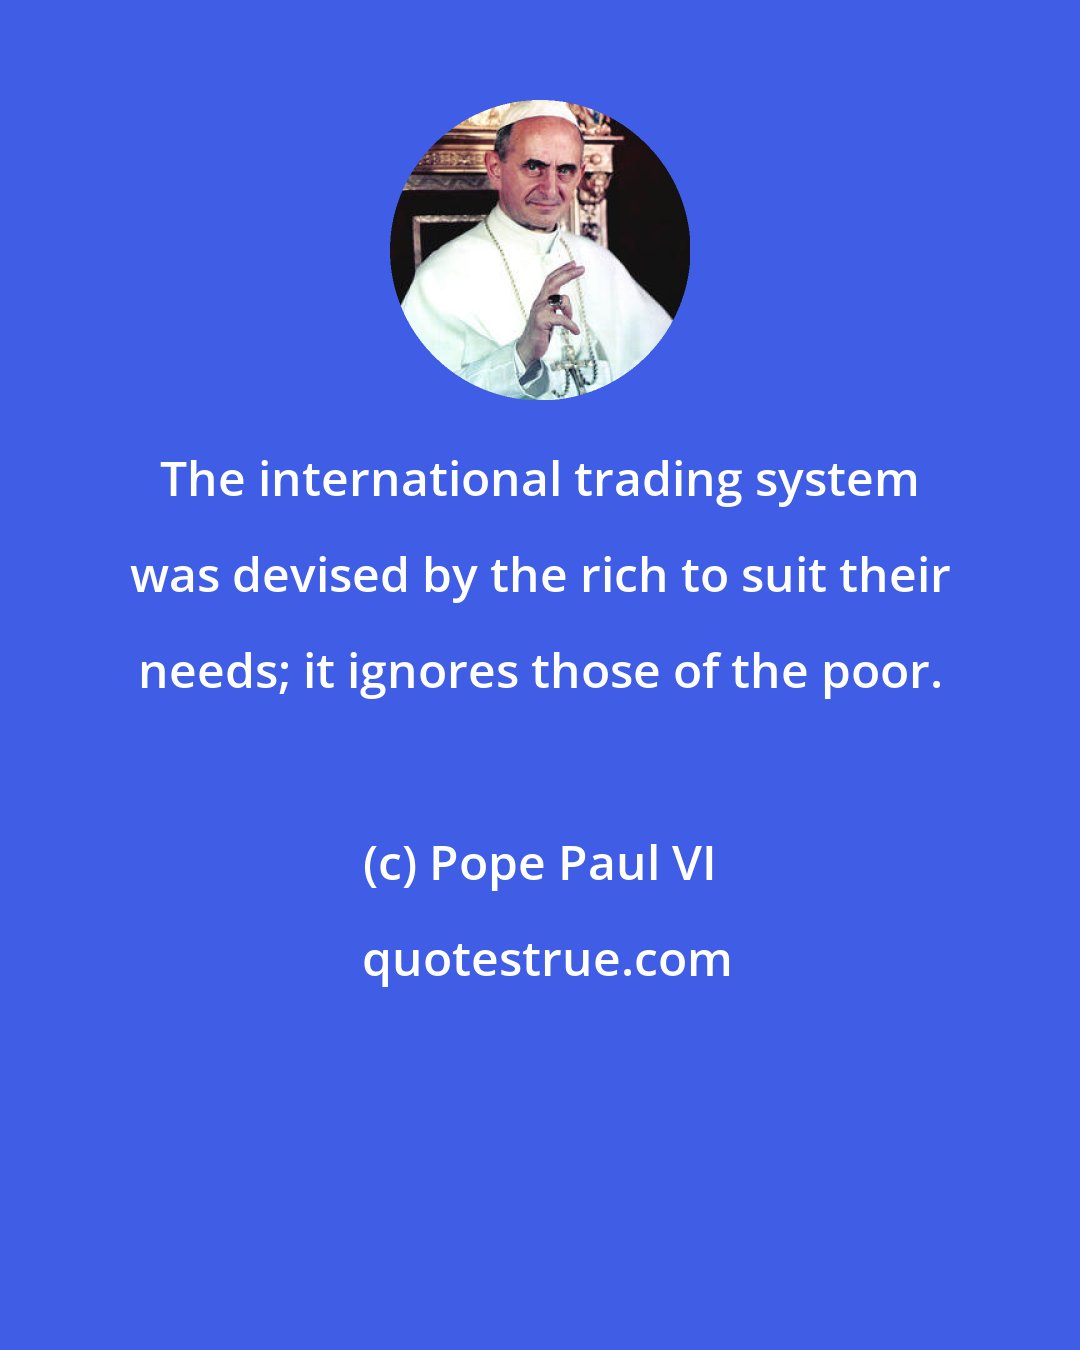 Pope Paul VI: The international trading system was devised by the rich to suit their needs; it ignores those of the poor.